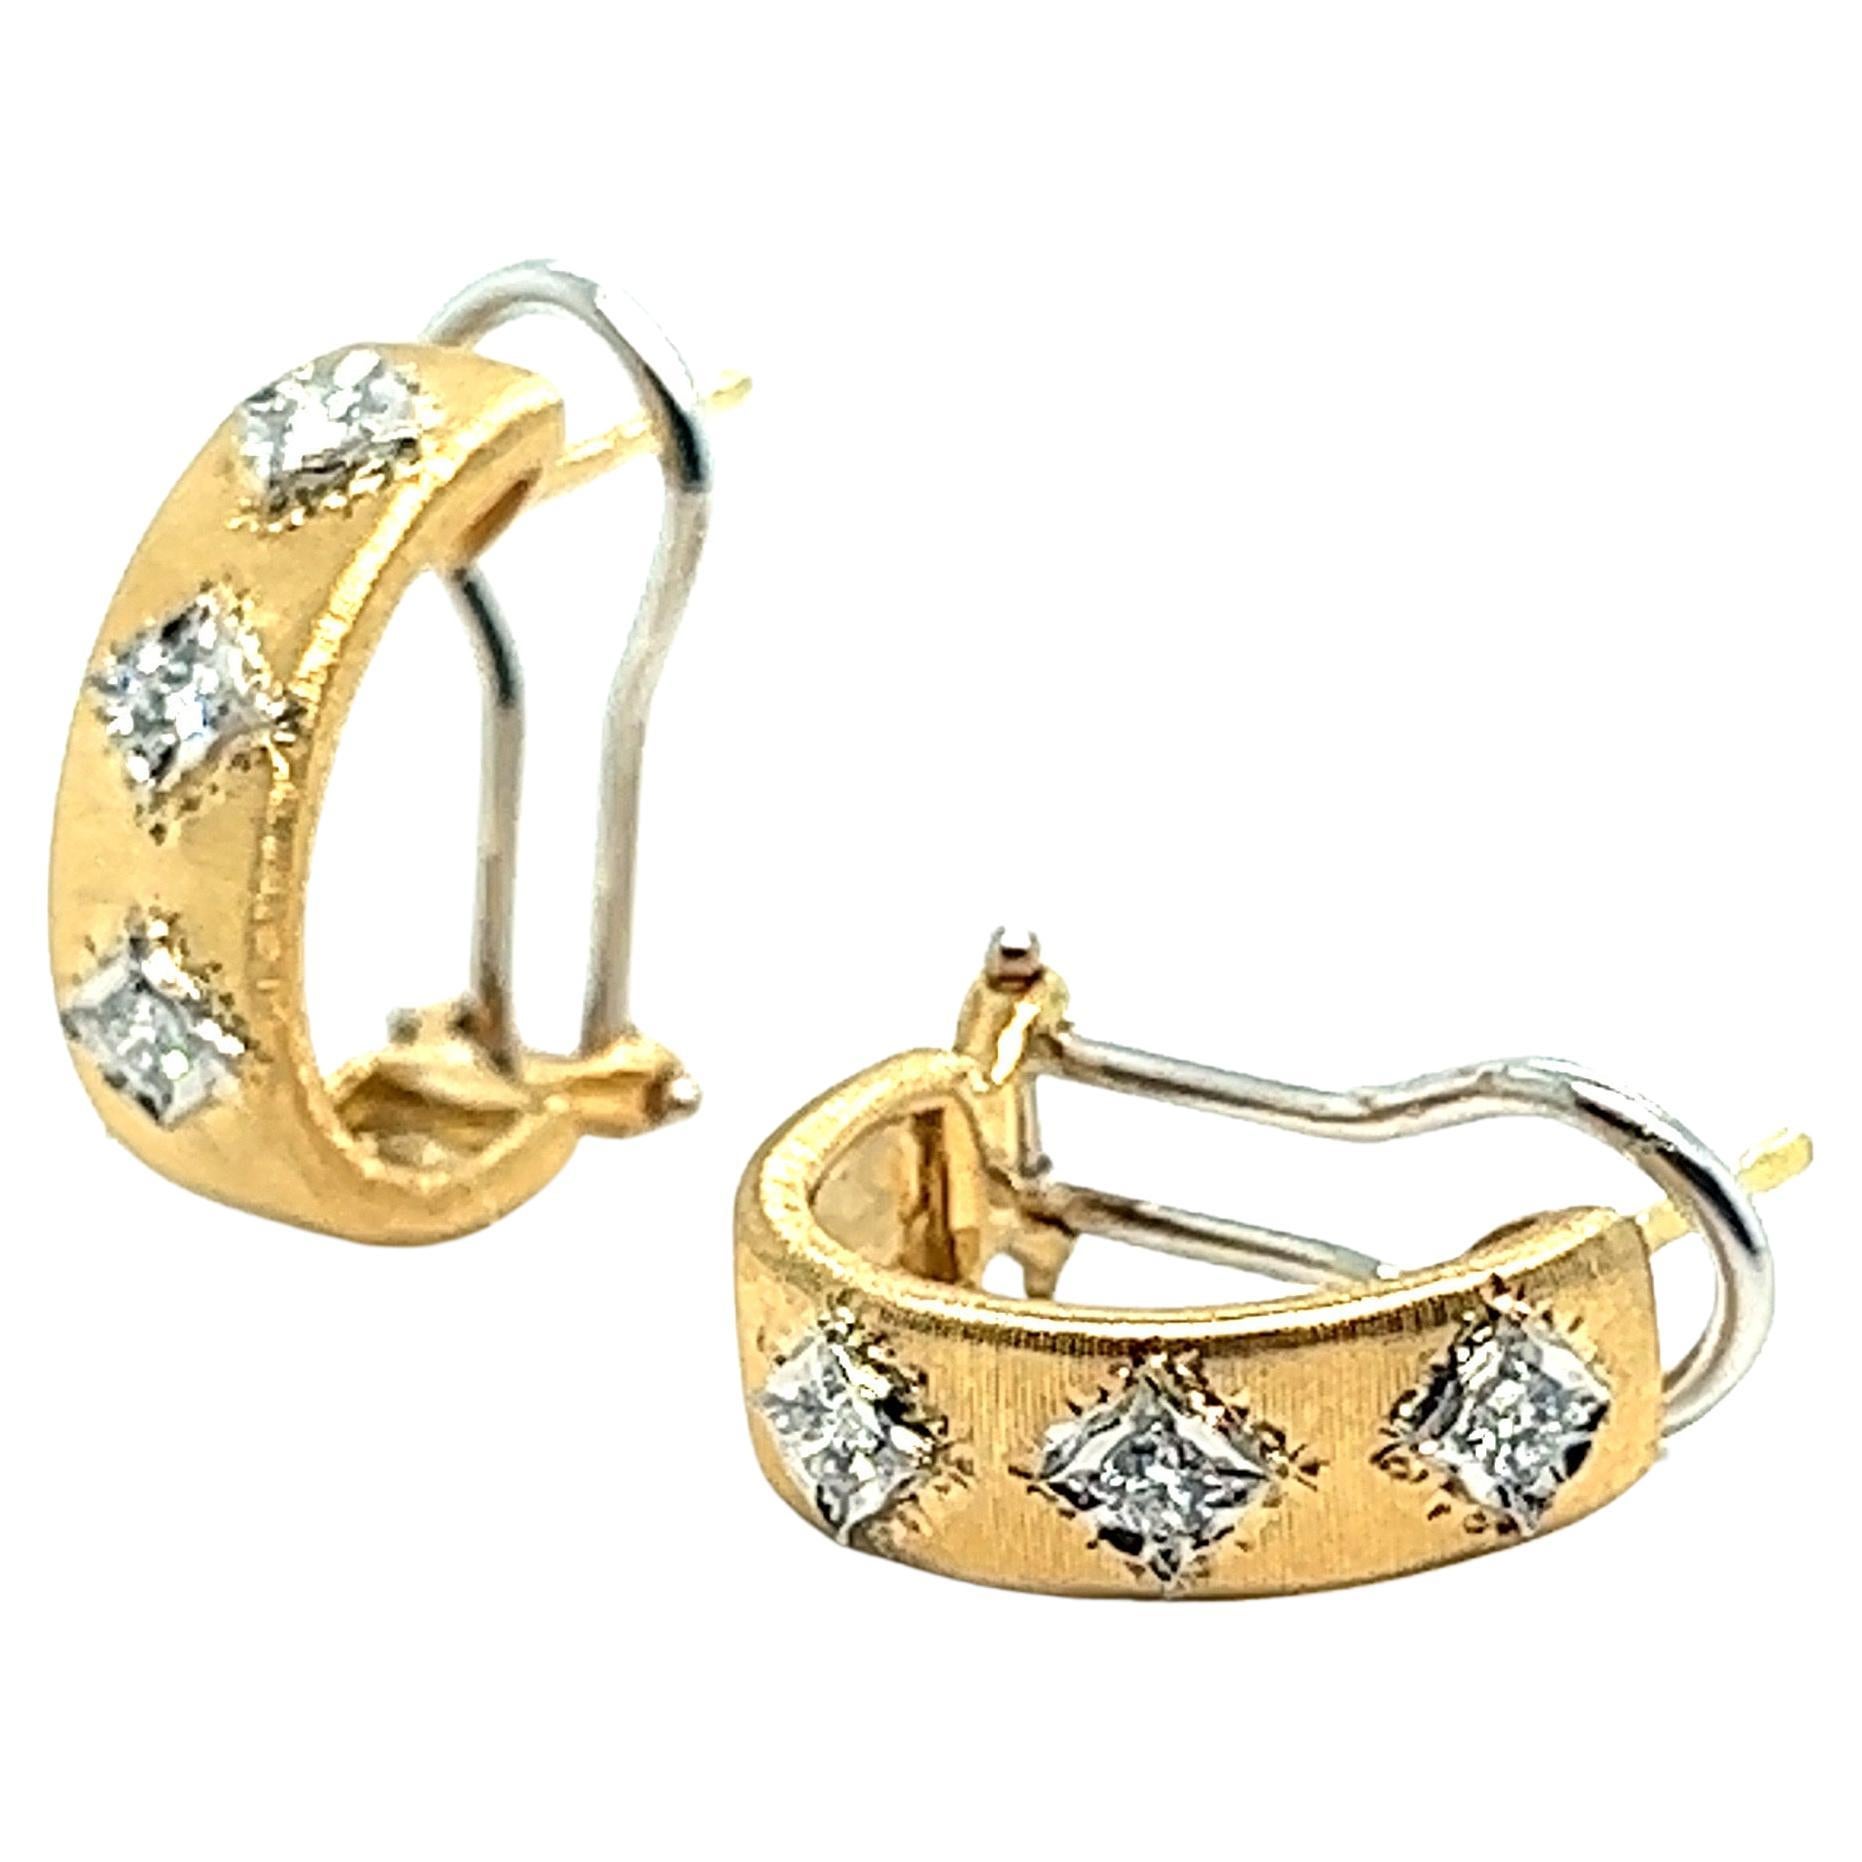 Earrings Clips yellow gold brushed diamonds

Beautiful earrings in brushed yellow gold 18 carats or 750/000. The earrings are set with 6 diamonds for a total weight of 0.180 carats. Decorated and set baroque, in white gold giving them maximum